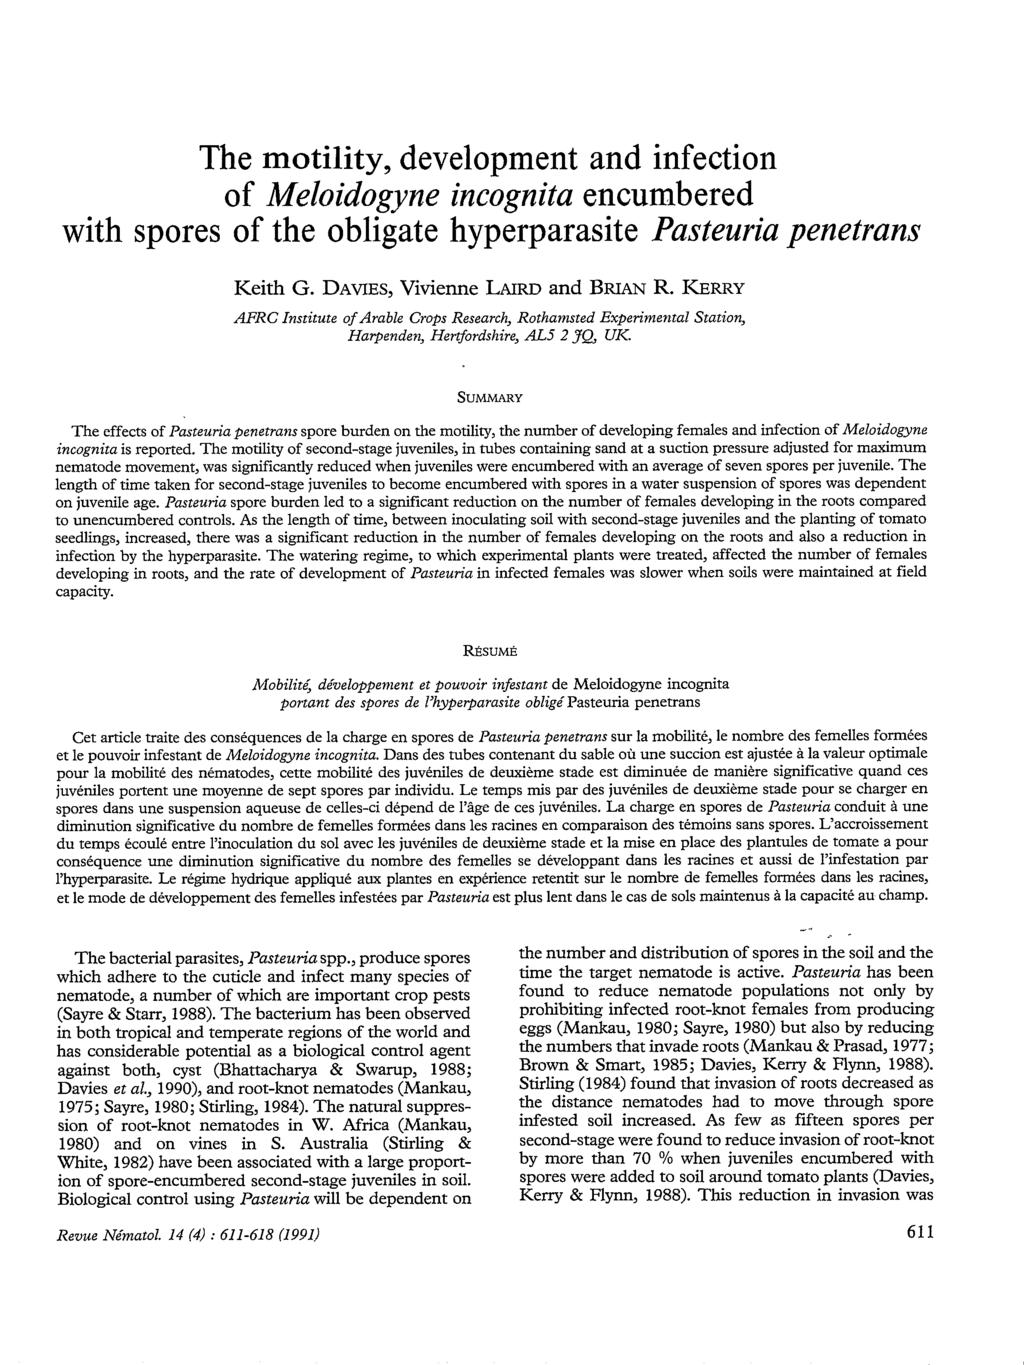 The motility, development and infection of Meloidogyne incognita encumbered with spores of the obligate hyperparasite Pasteuria penetrans Keith G. DAWES, Vivienne LAIRD and BRIAN R.